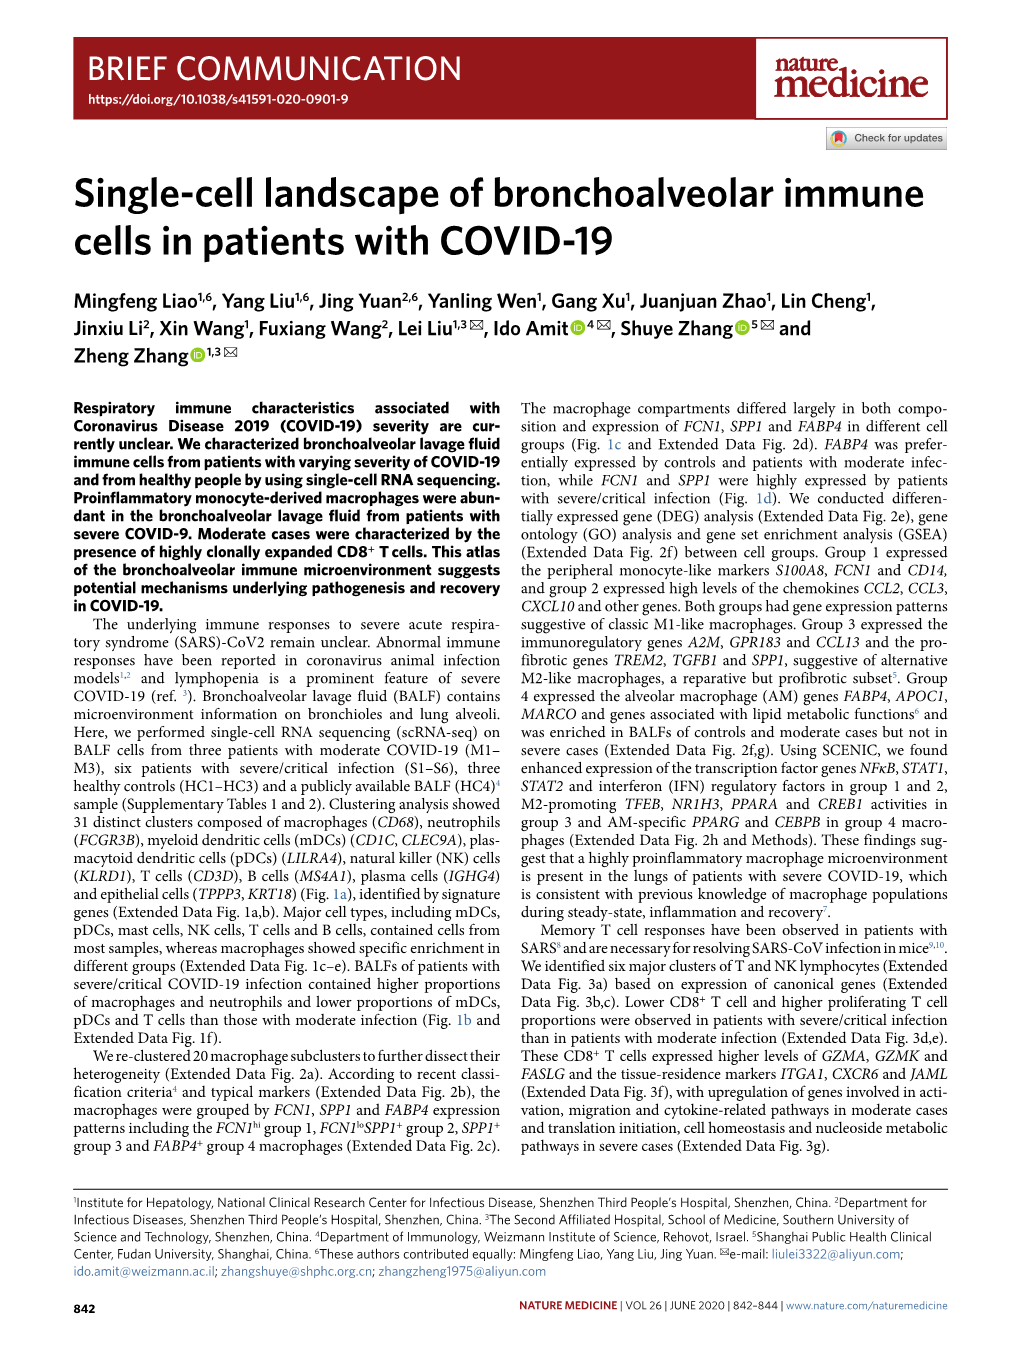 Single-Cell Landscape of Bronchoalveolar Immune Cells in Patients with COVID-19